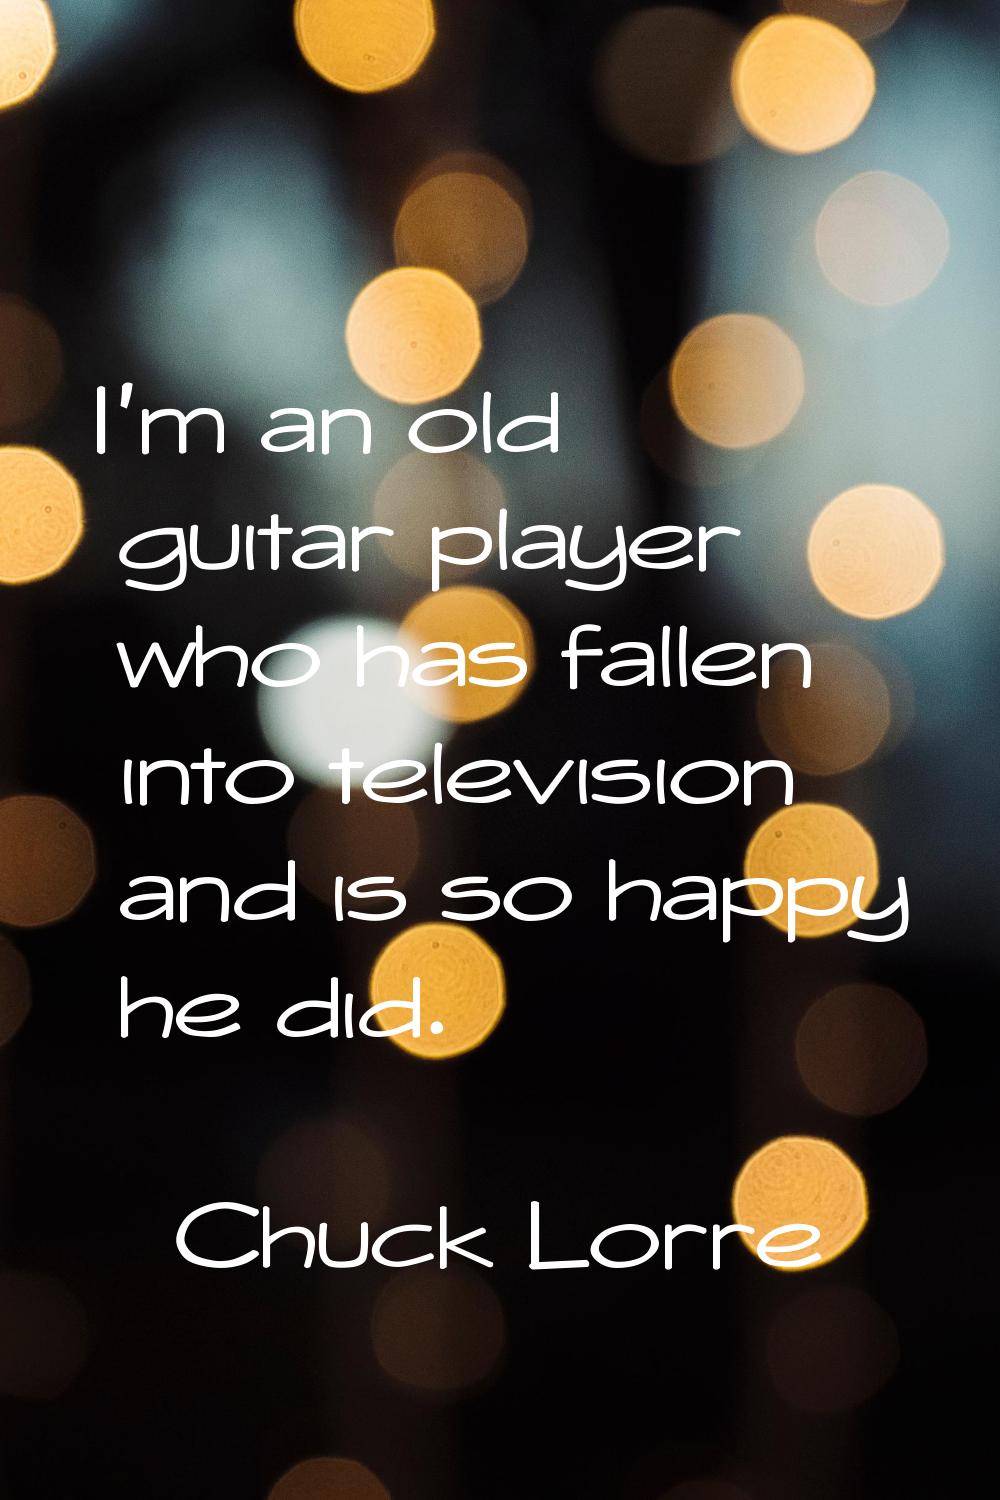 I'm an old guitar player who has fallen into television and is so happy he did.